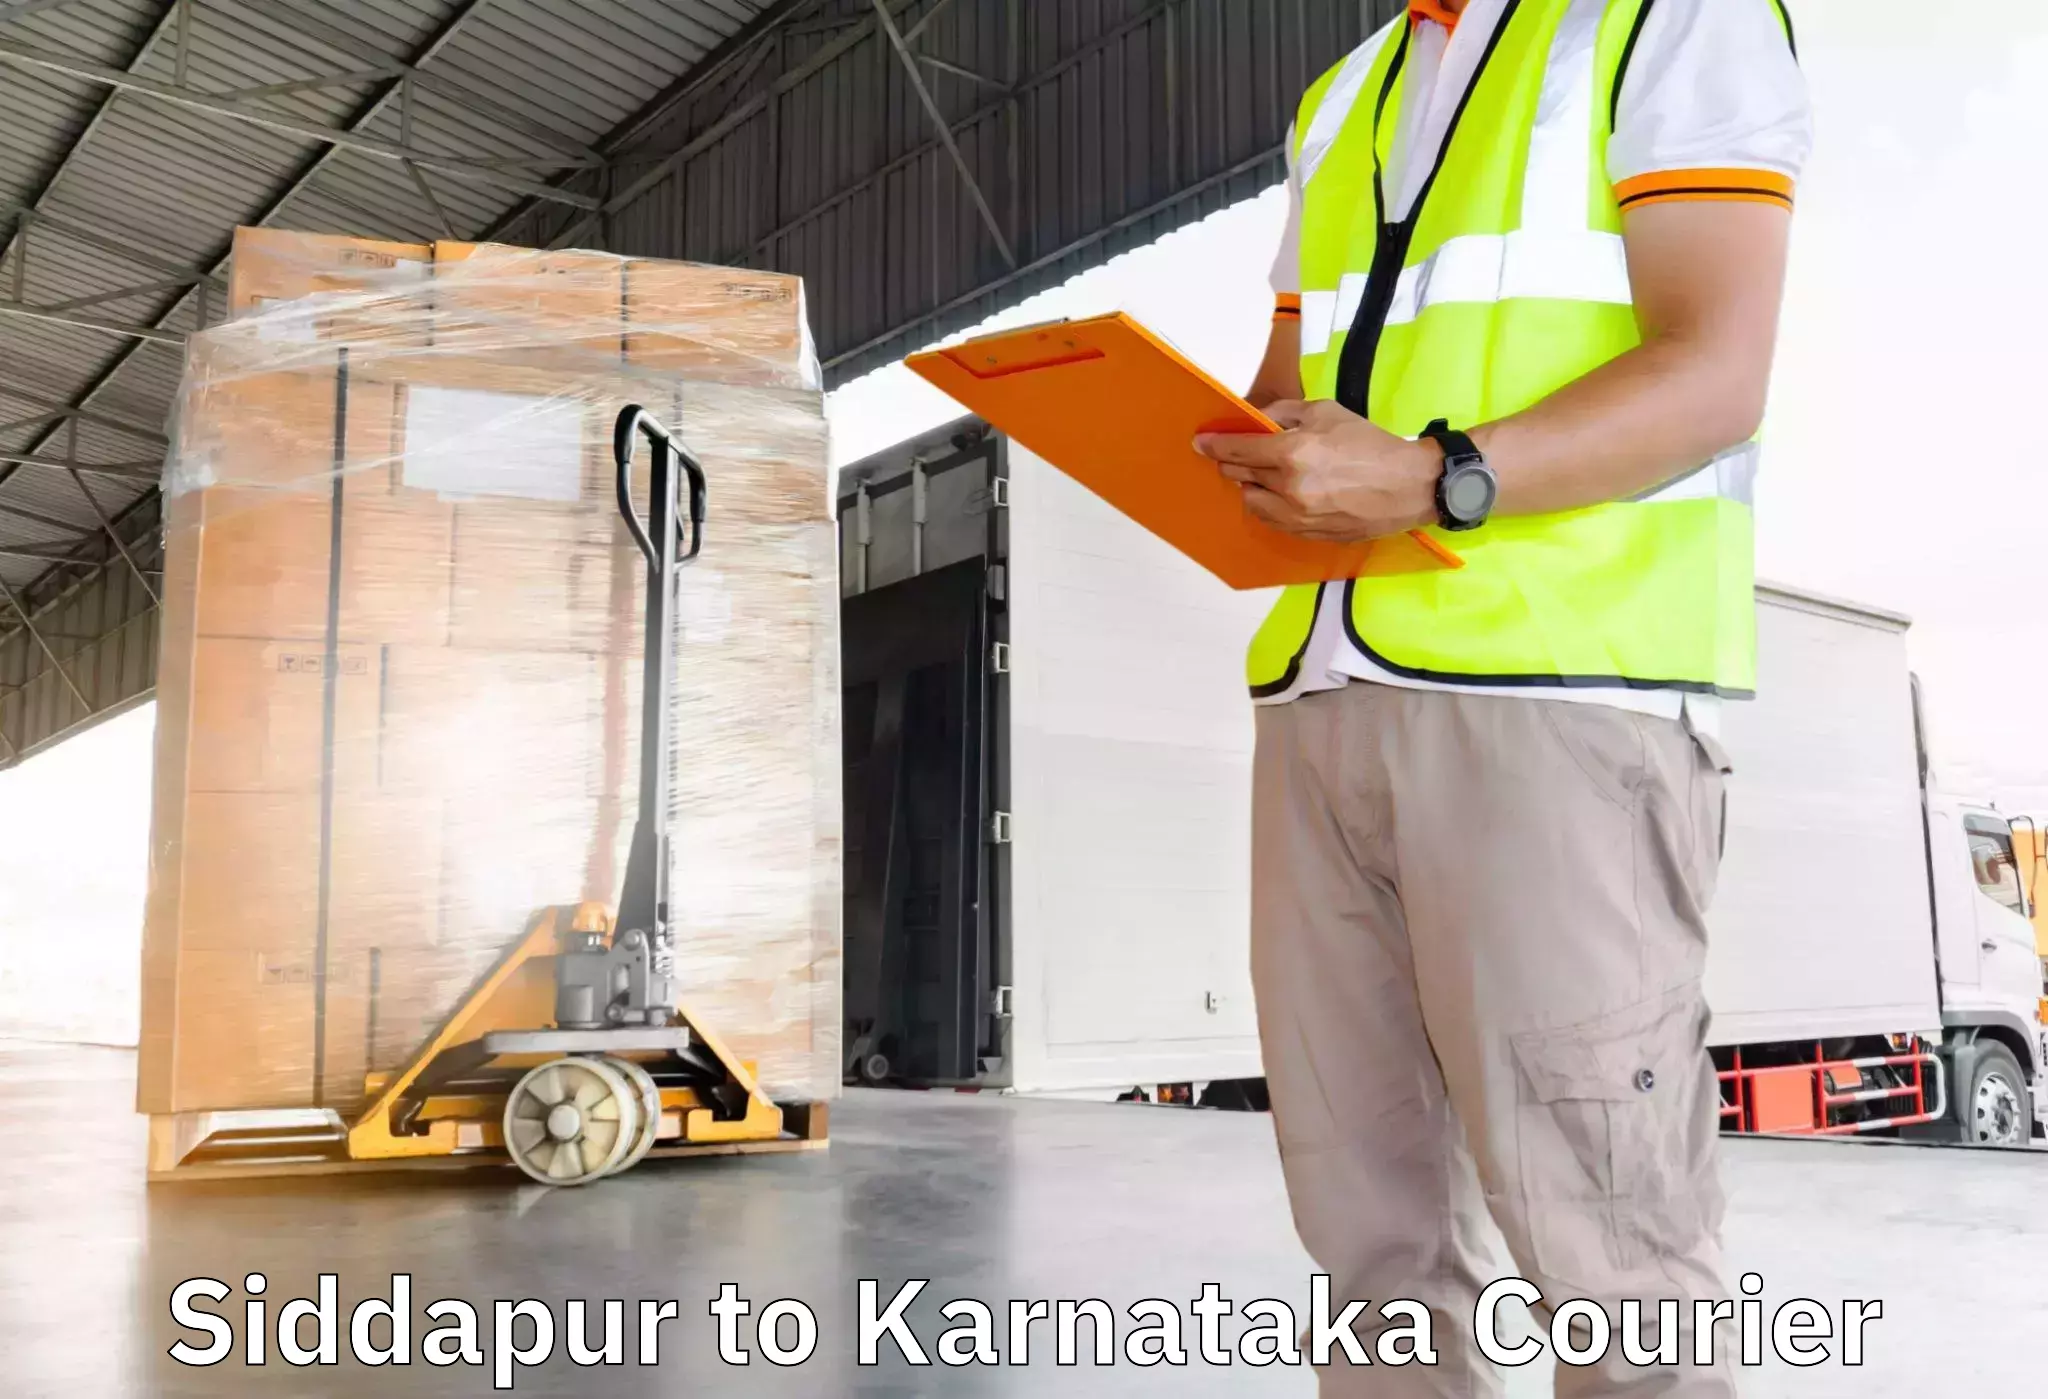 Moving and packing experts Siddapur to Chikkamagalur